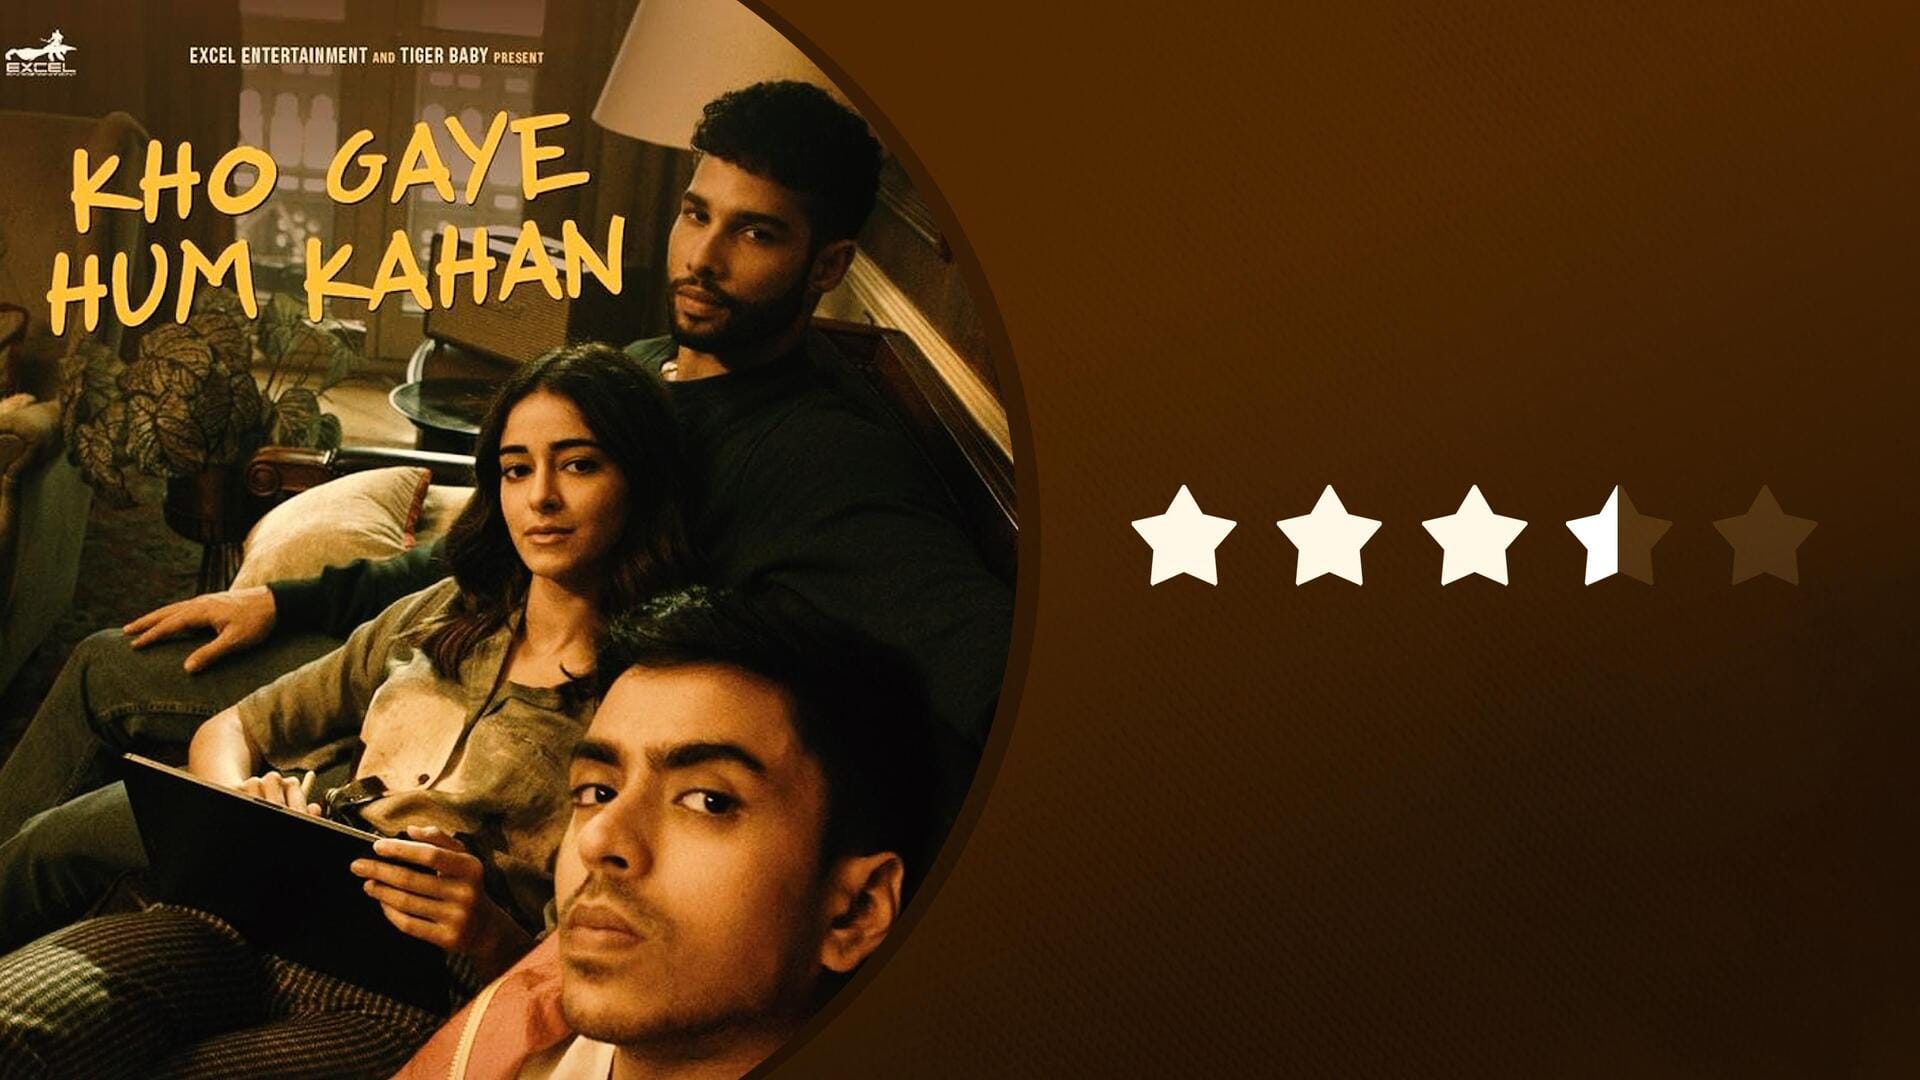 'Kho Gaye Hum Kahan' review: Relatable tale of modern-day relationships